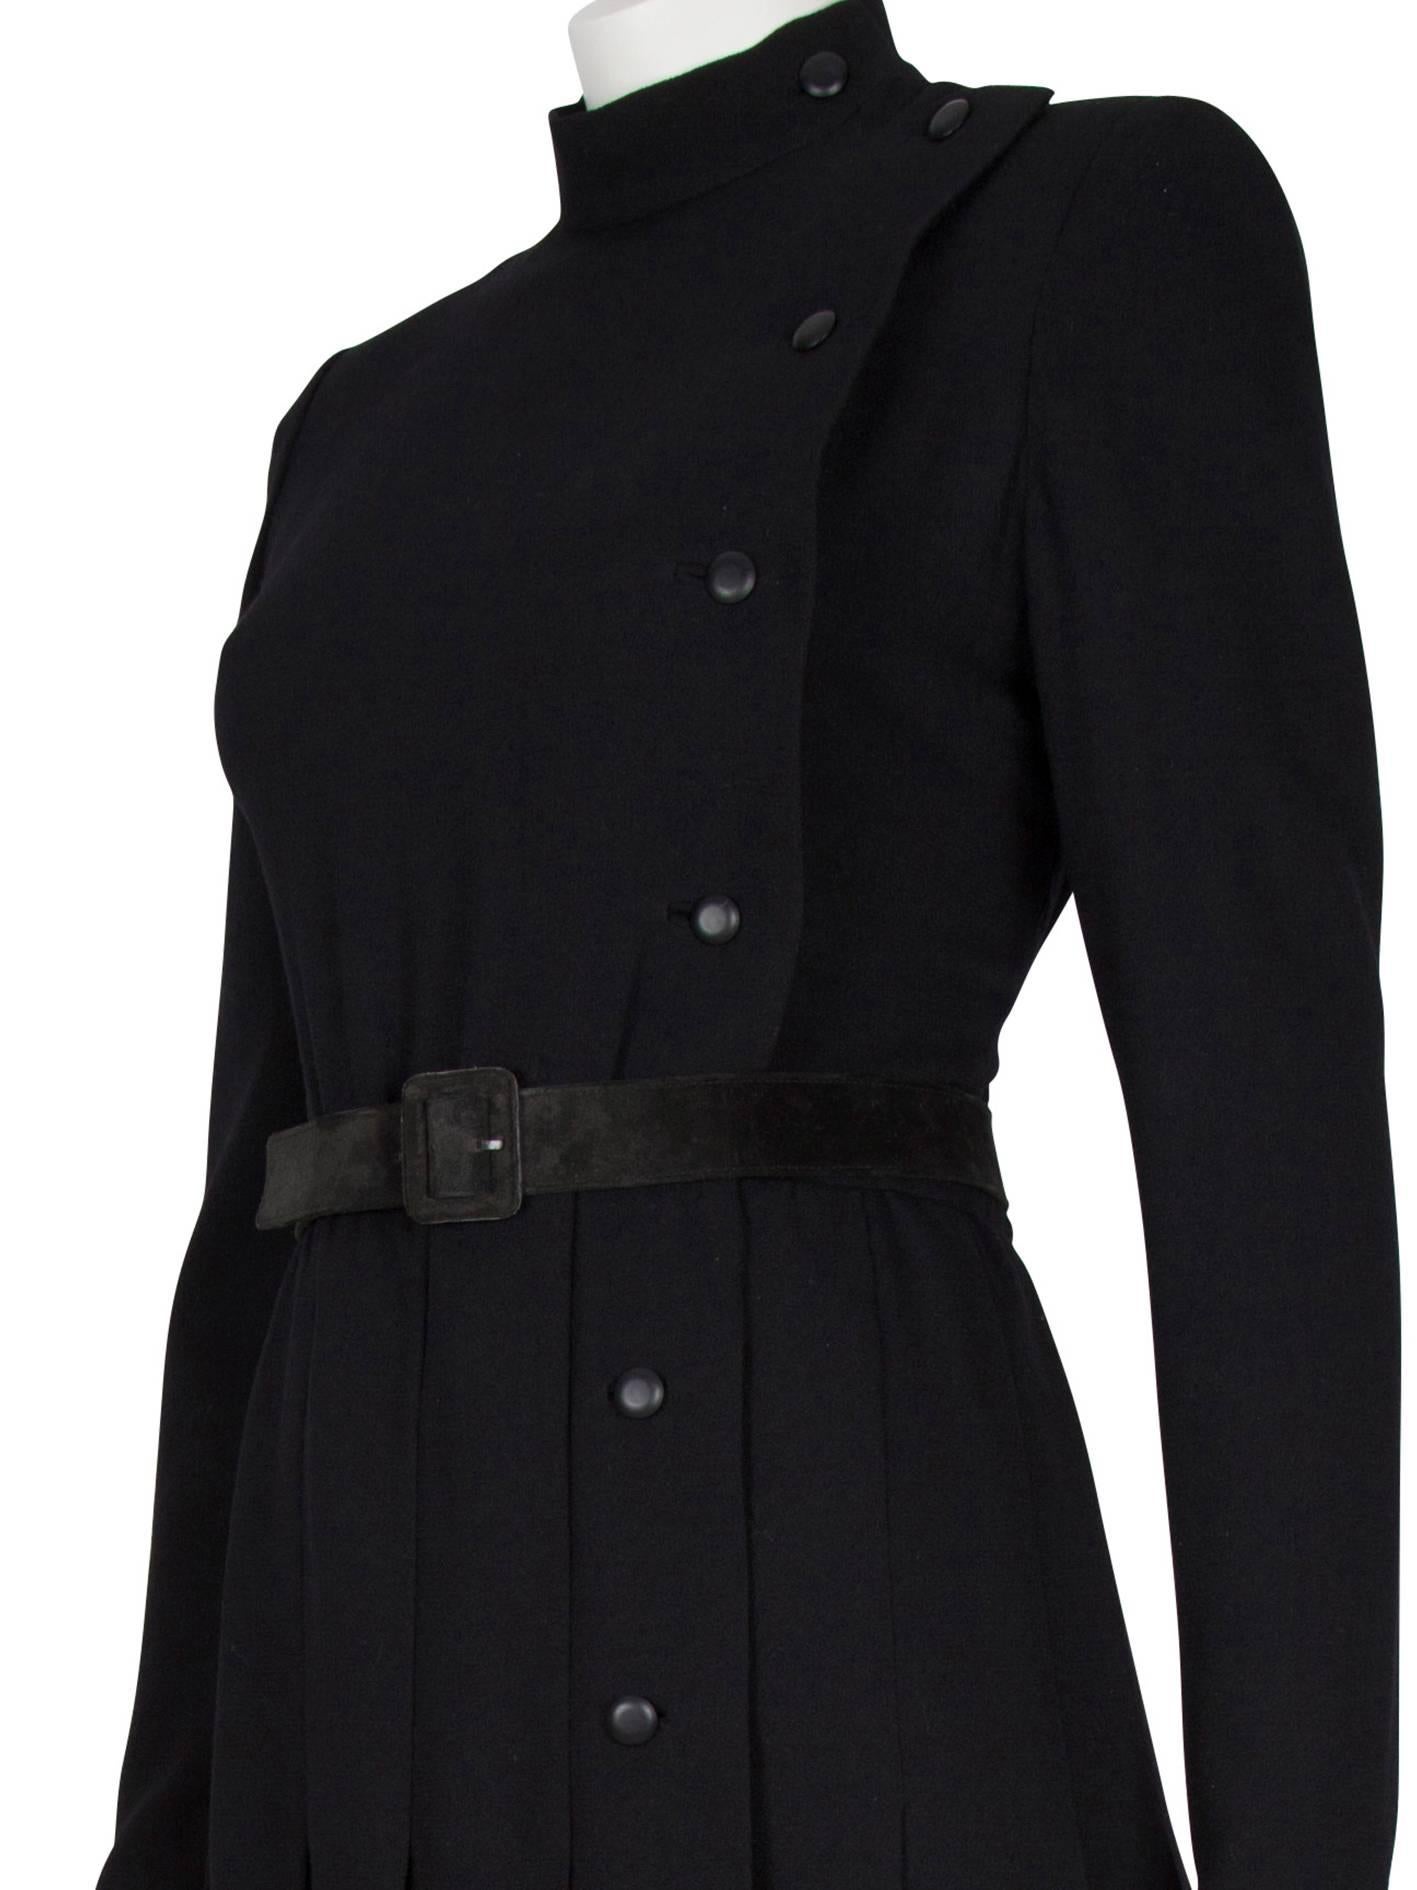 A/W 1979 Dior Couture Black Silk Crepe Button-Down Wrap Dress with Suede Belt For Sale 4